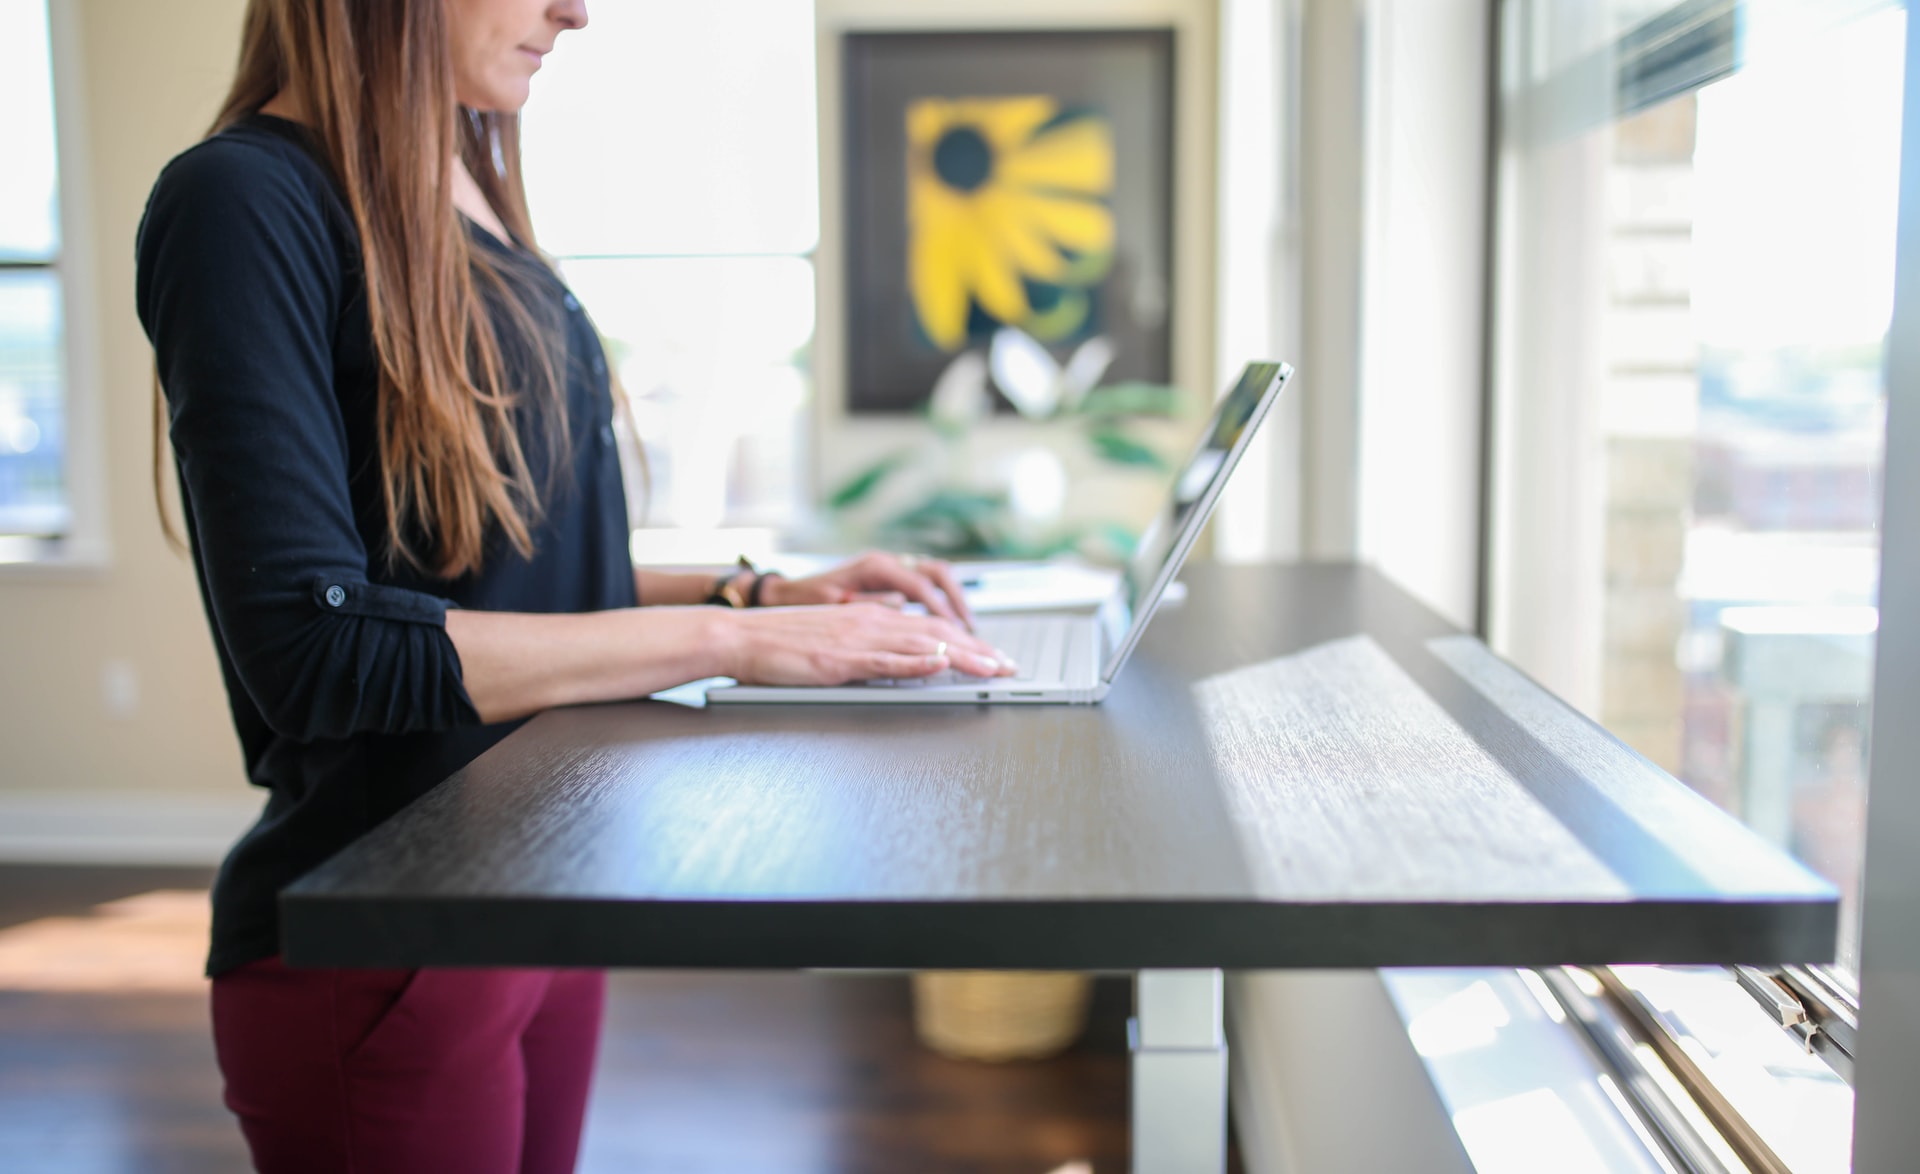 6 Great Benefits of Using a Standing Desk